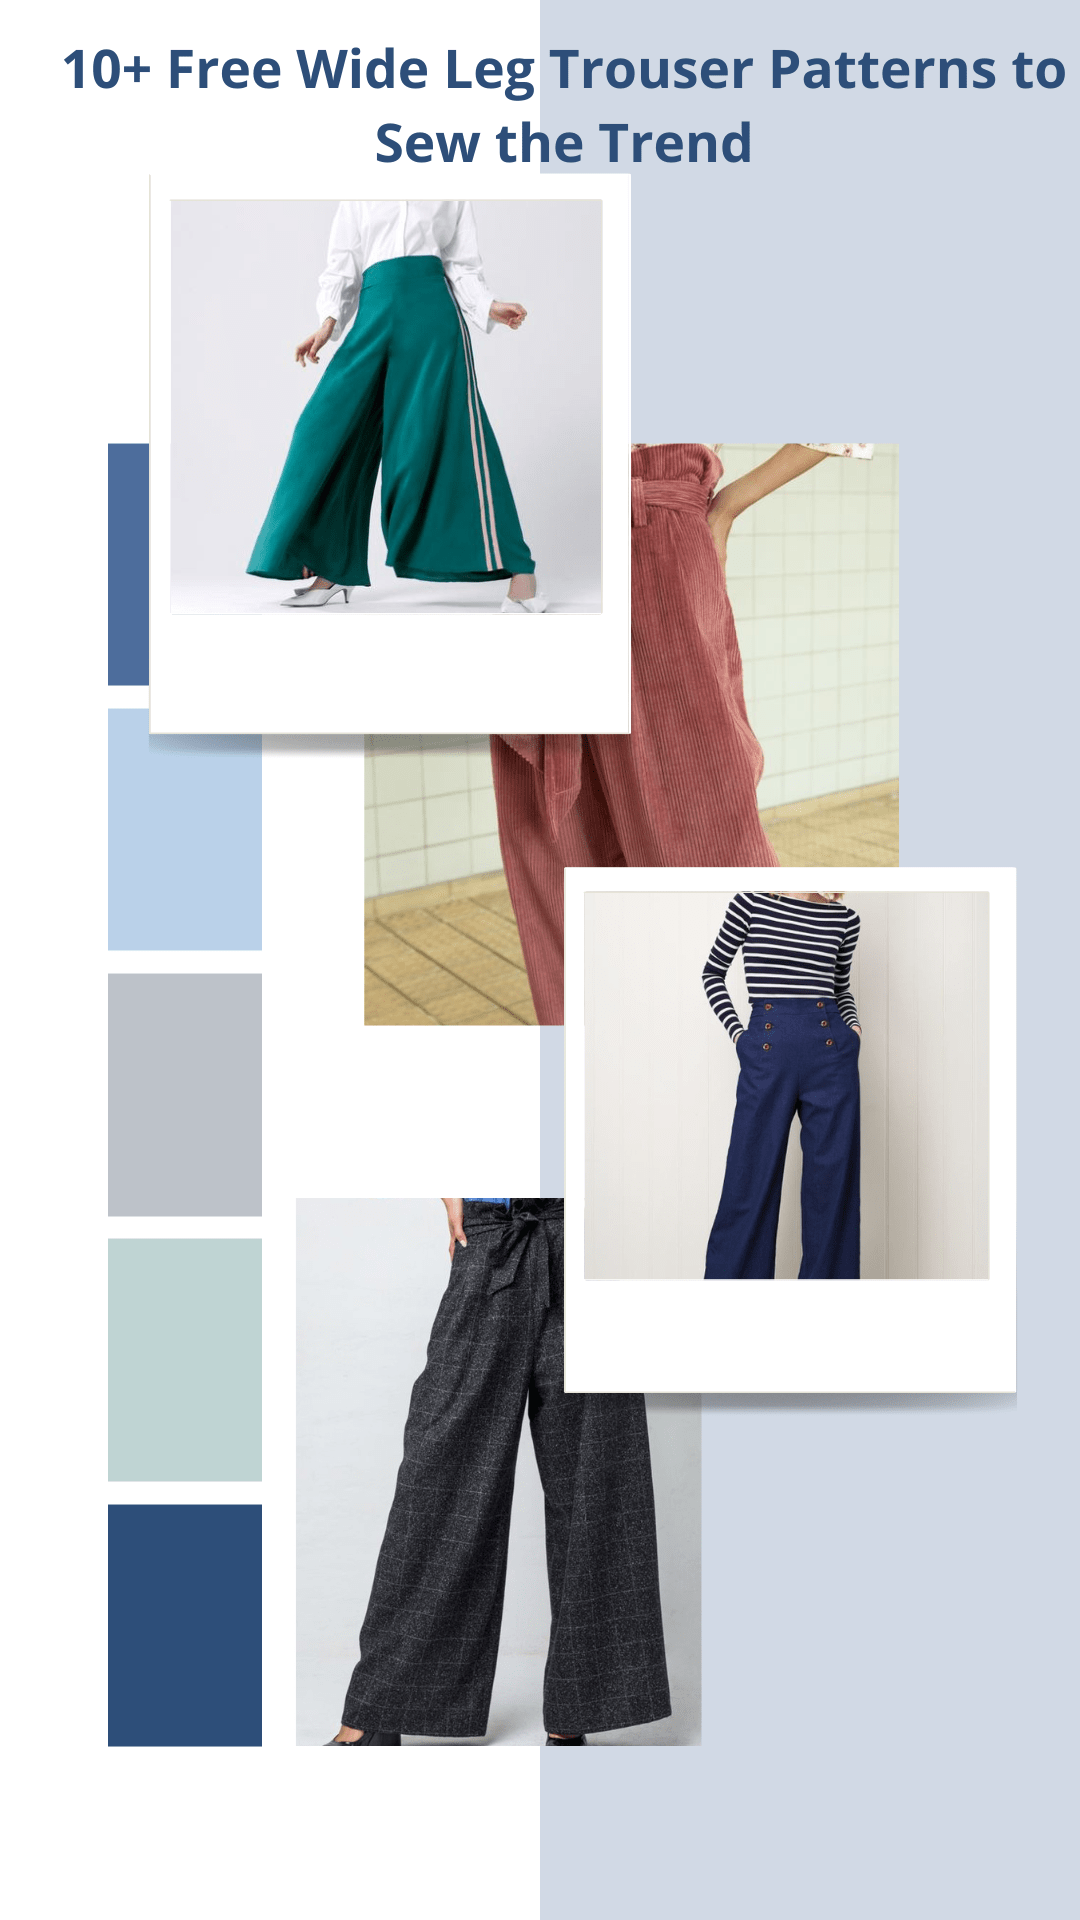 10+ Free Wide Leg Trouser Patterns to Sew the Trend  On the Cutting Floor:  Printable pdf sewing patterns and tutorials for women